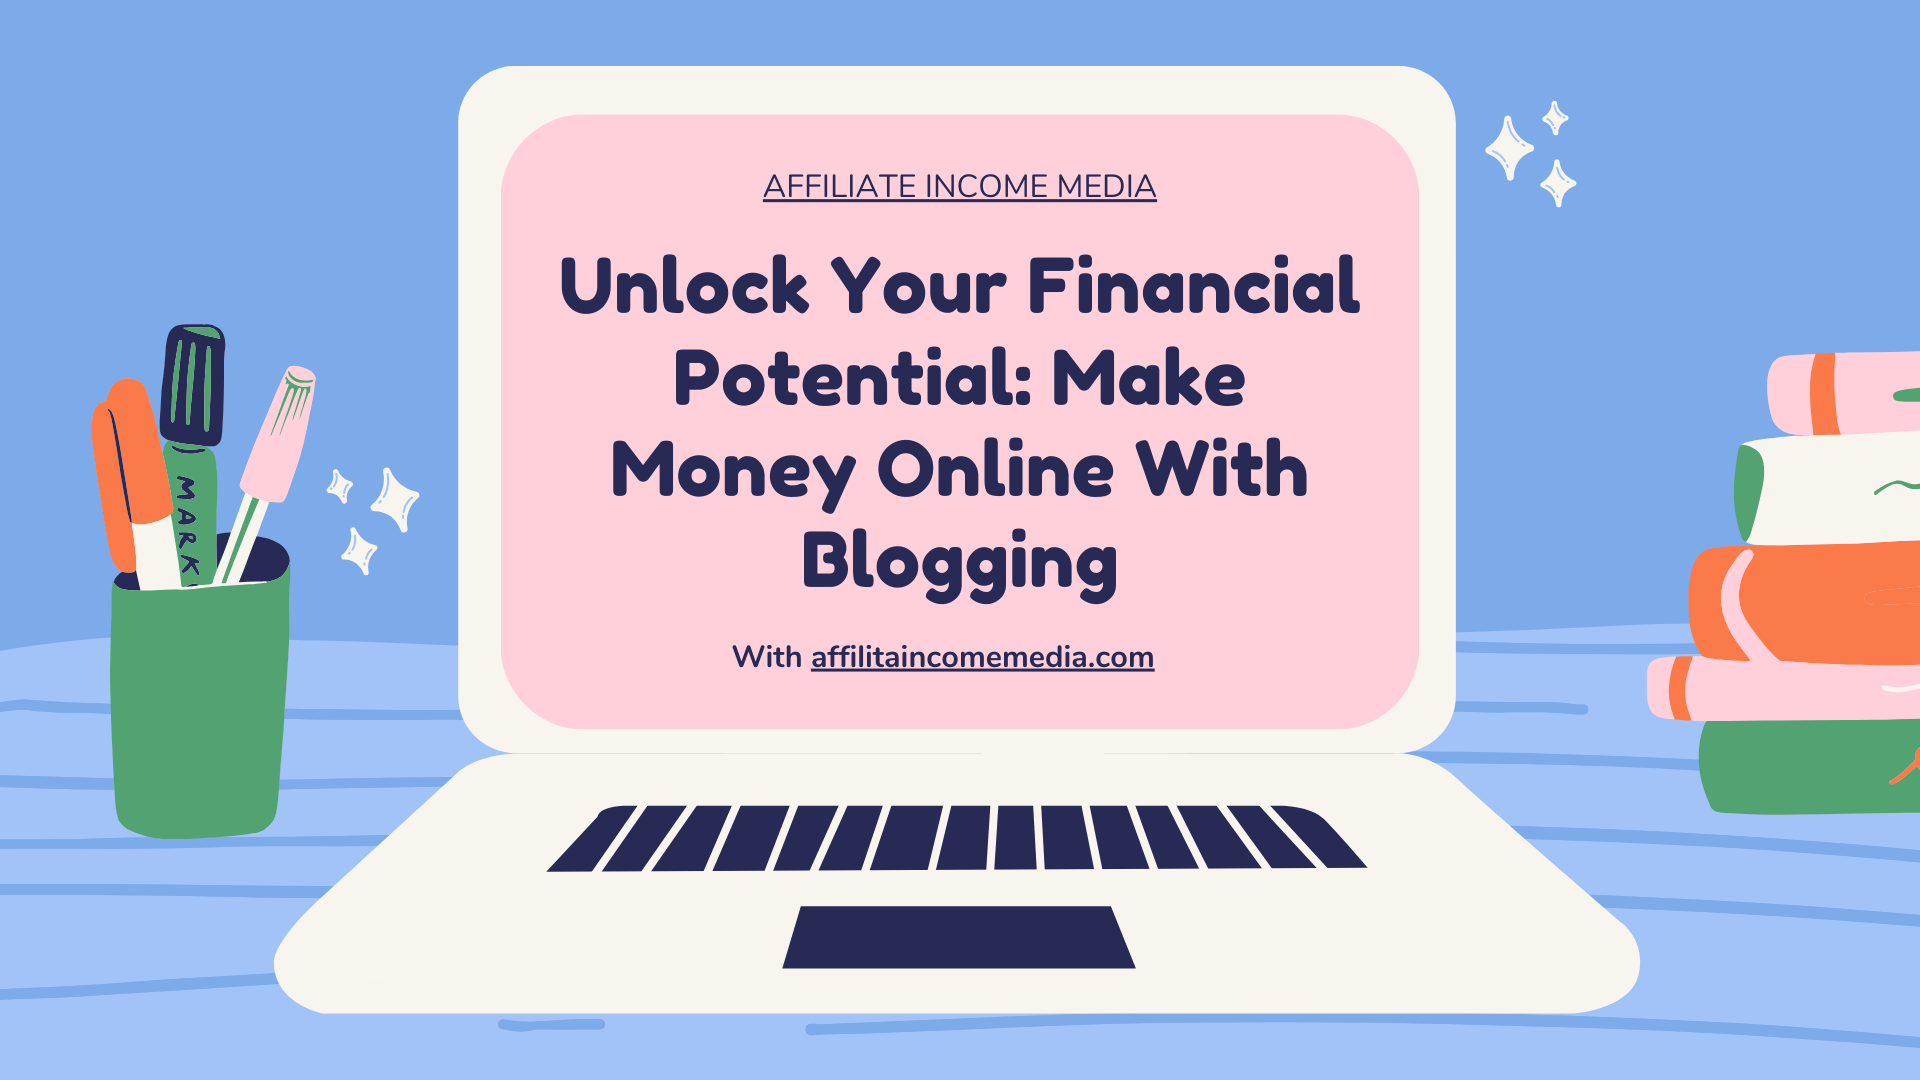 Unlock Your Financial Potential: Make Money Online With Blogging